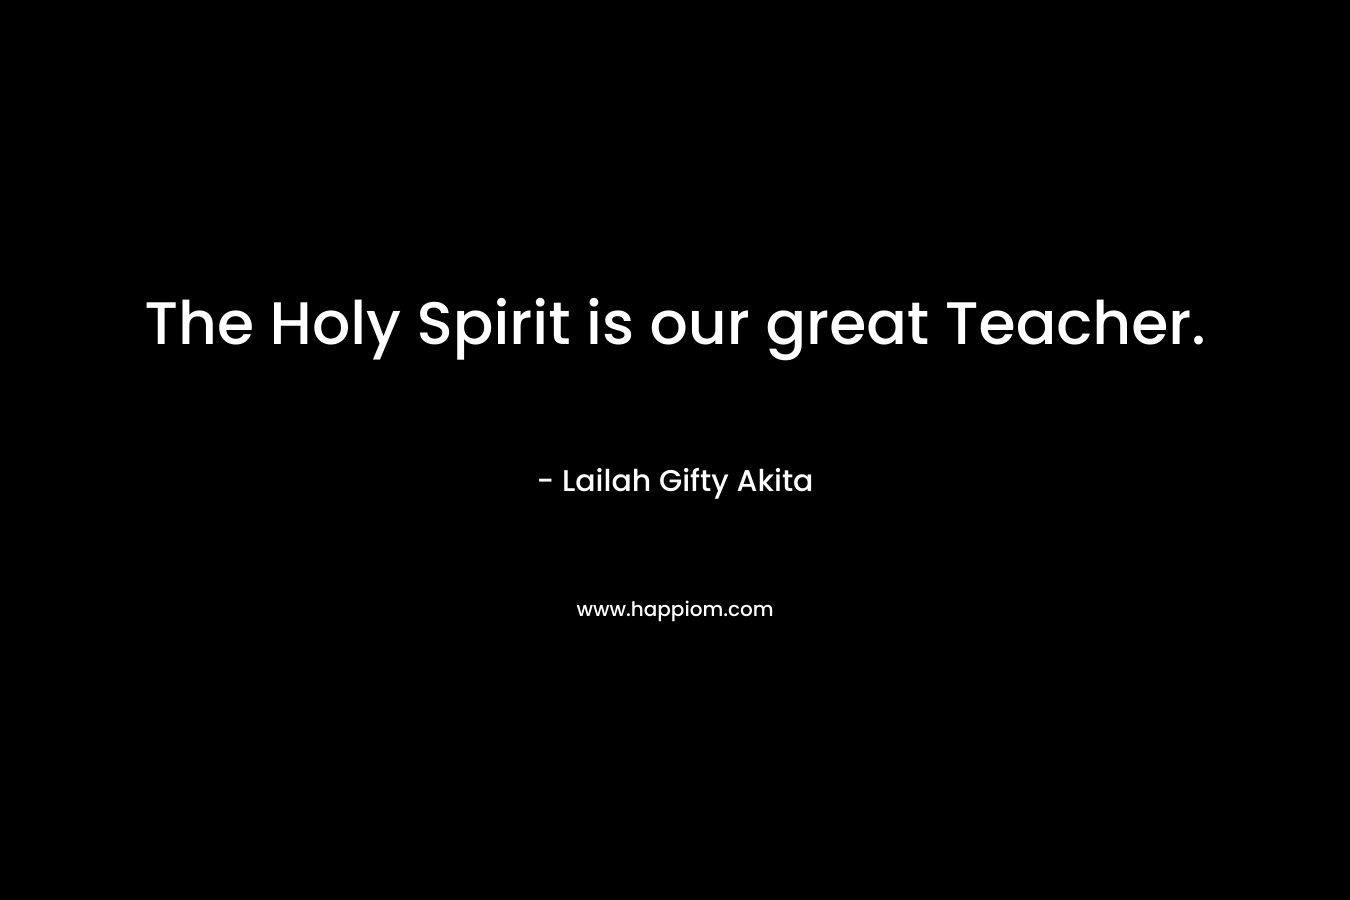 The Holy Spirit is our great Teacher.